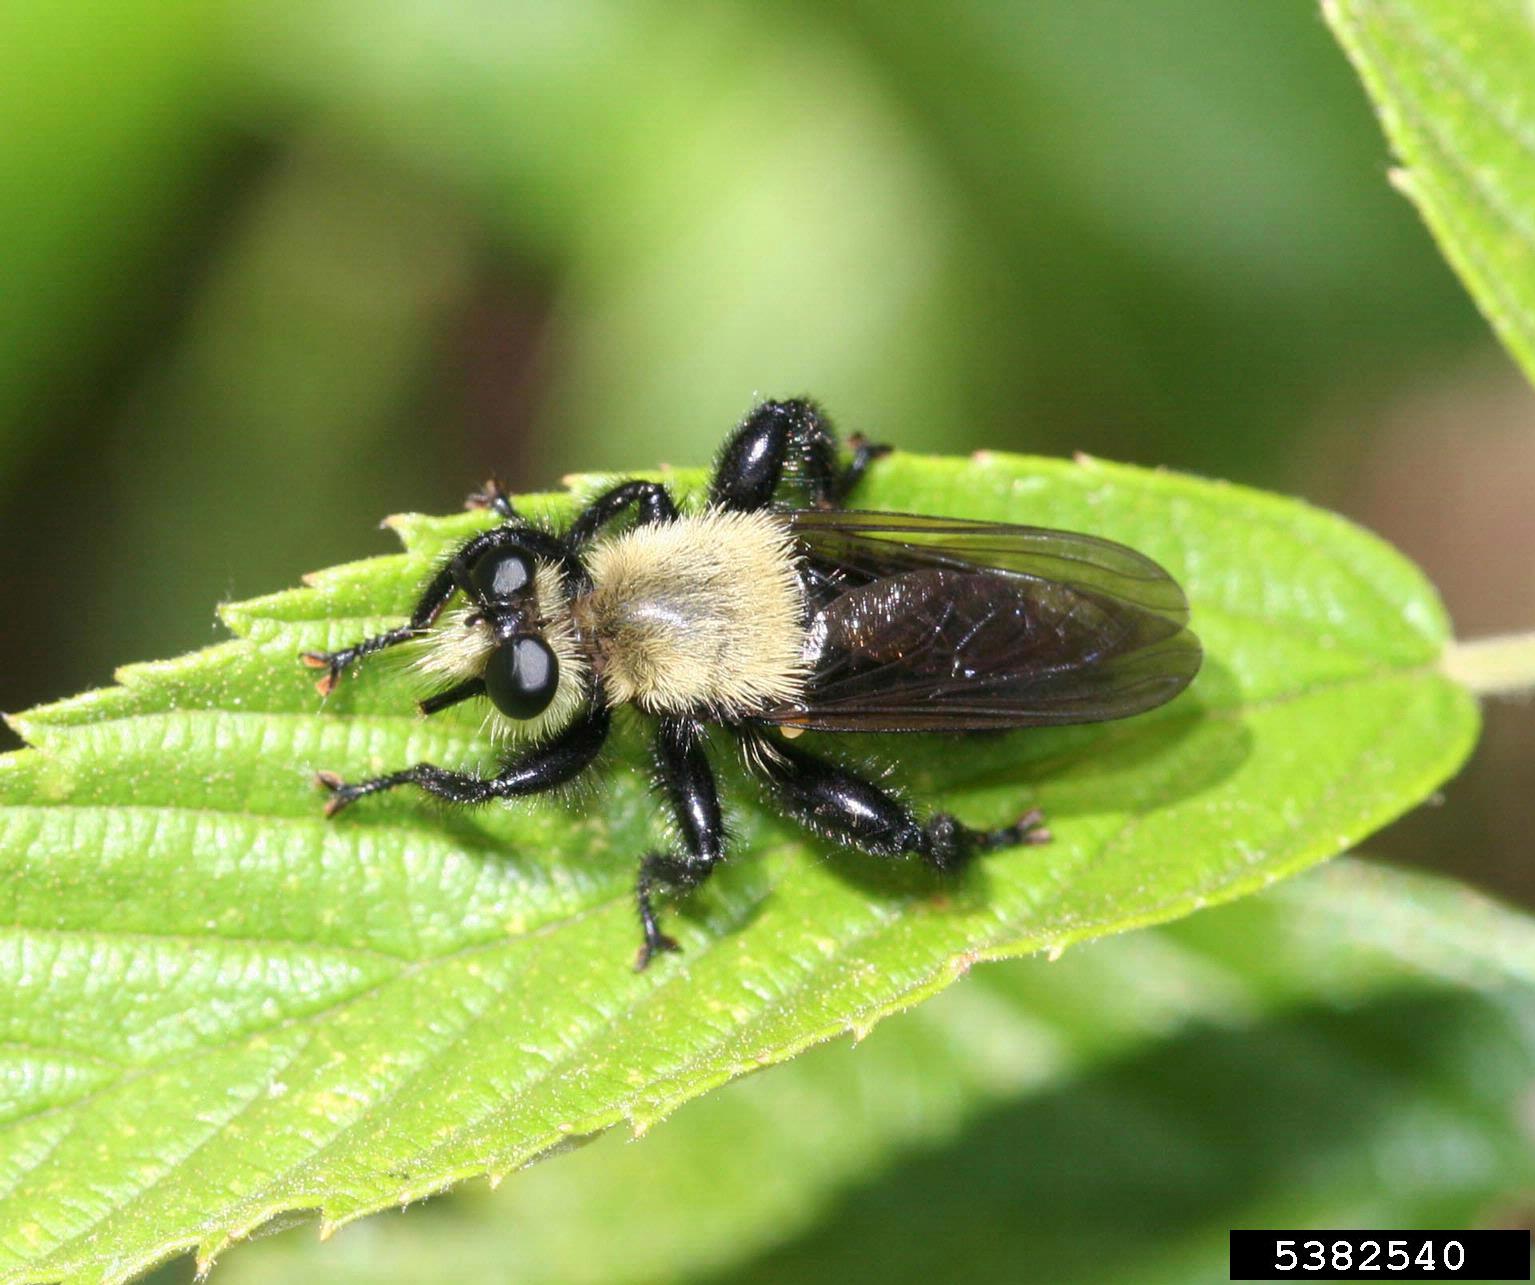 A robber fly.